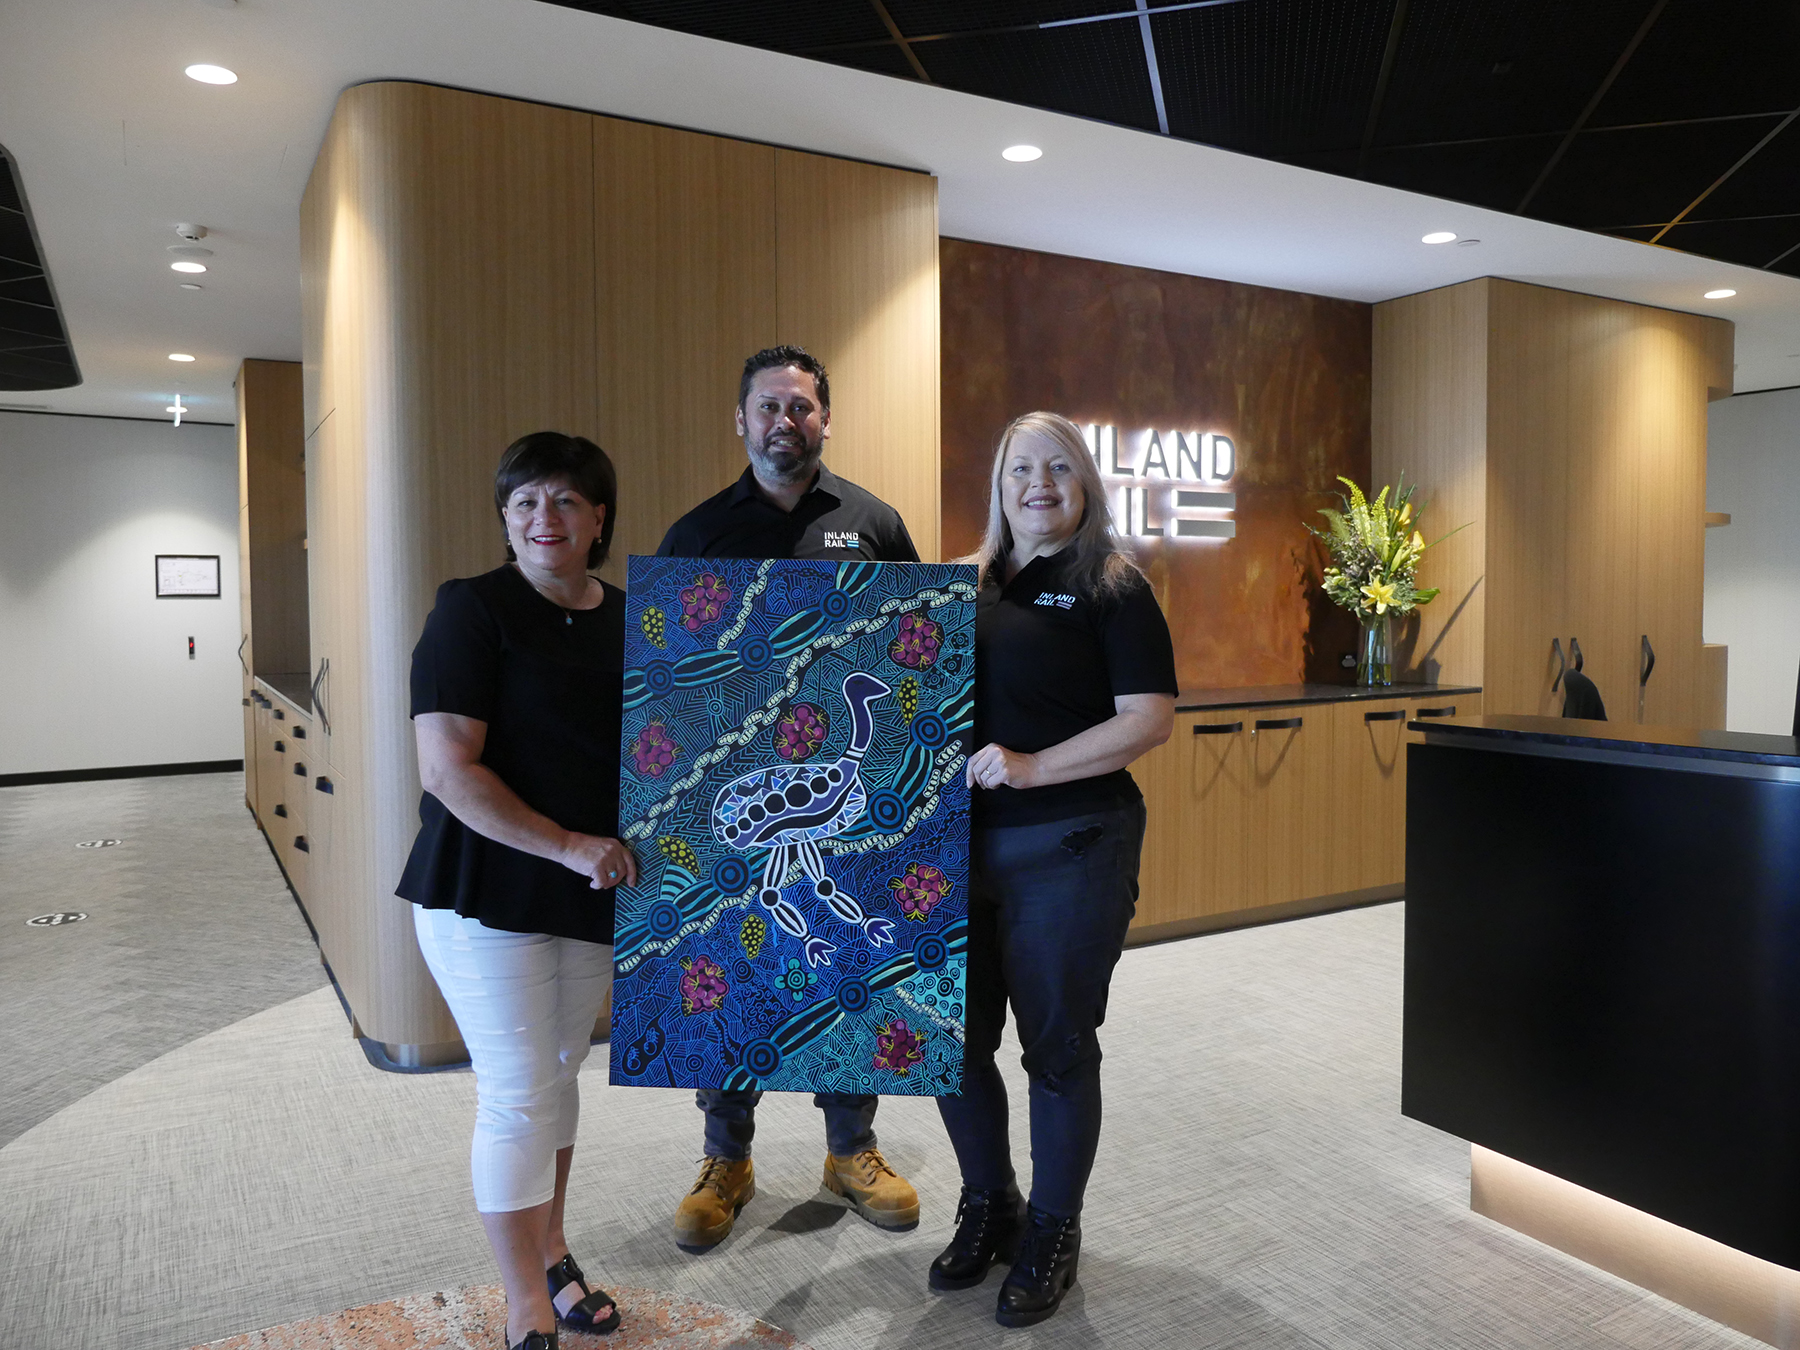 Jagera artwork titled My Country, My Totem by artist Ngarijan Rosser presented to ARTC employees